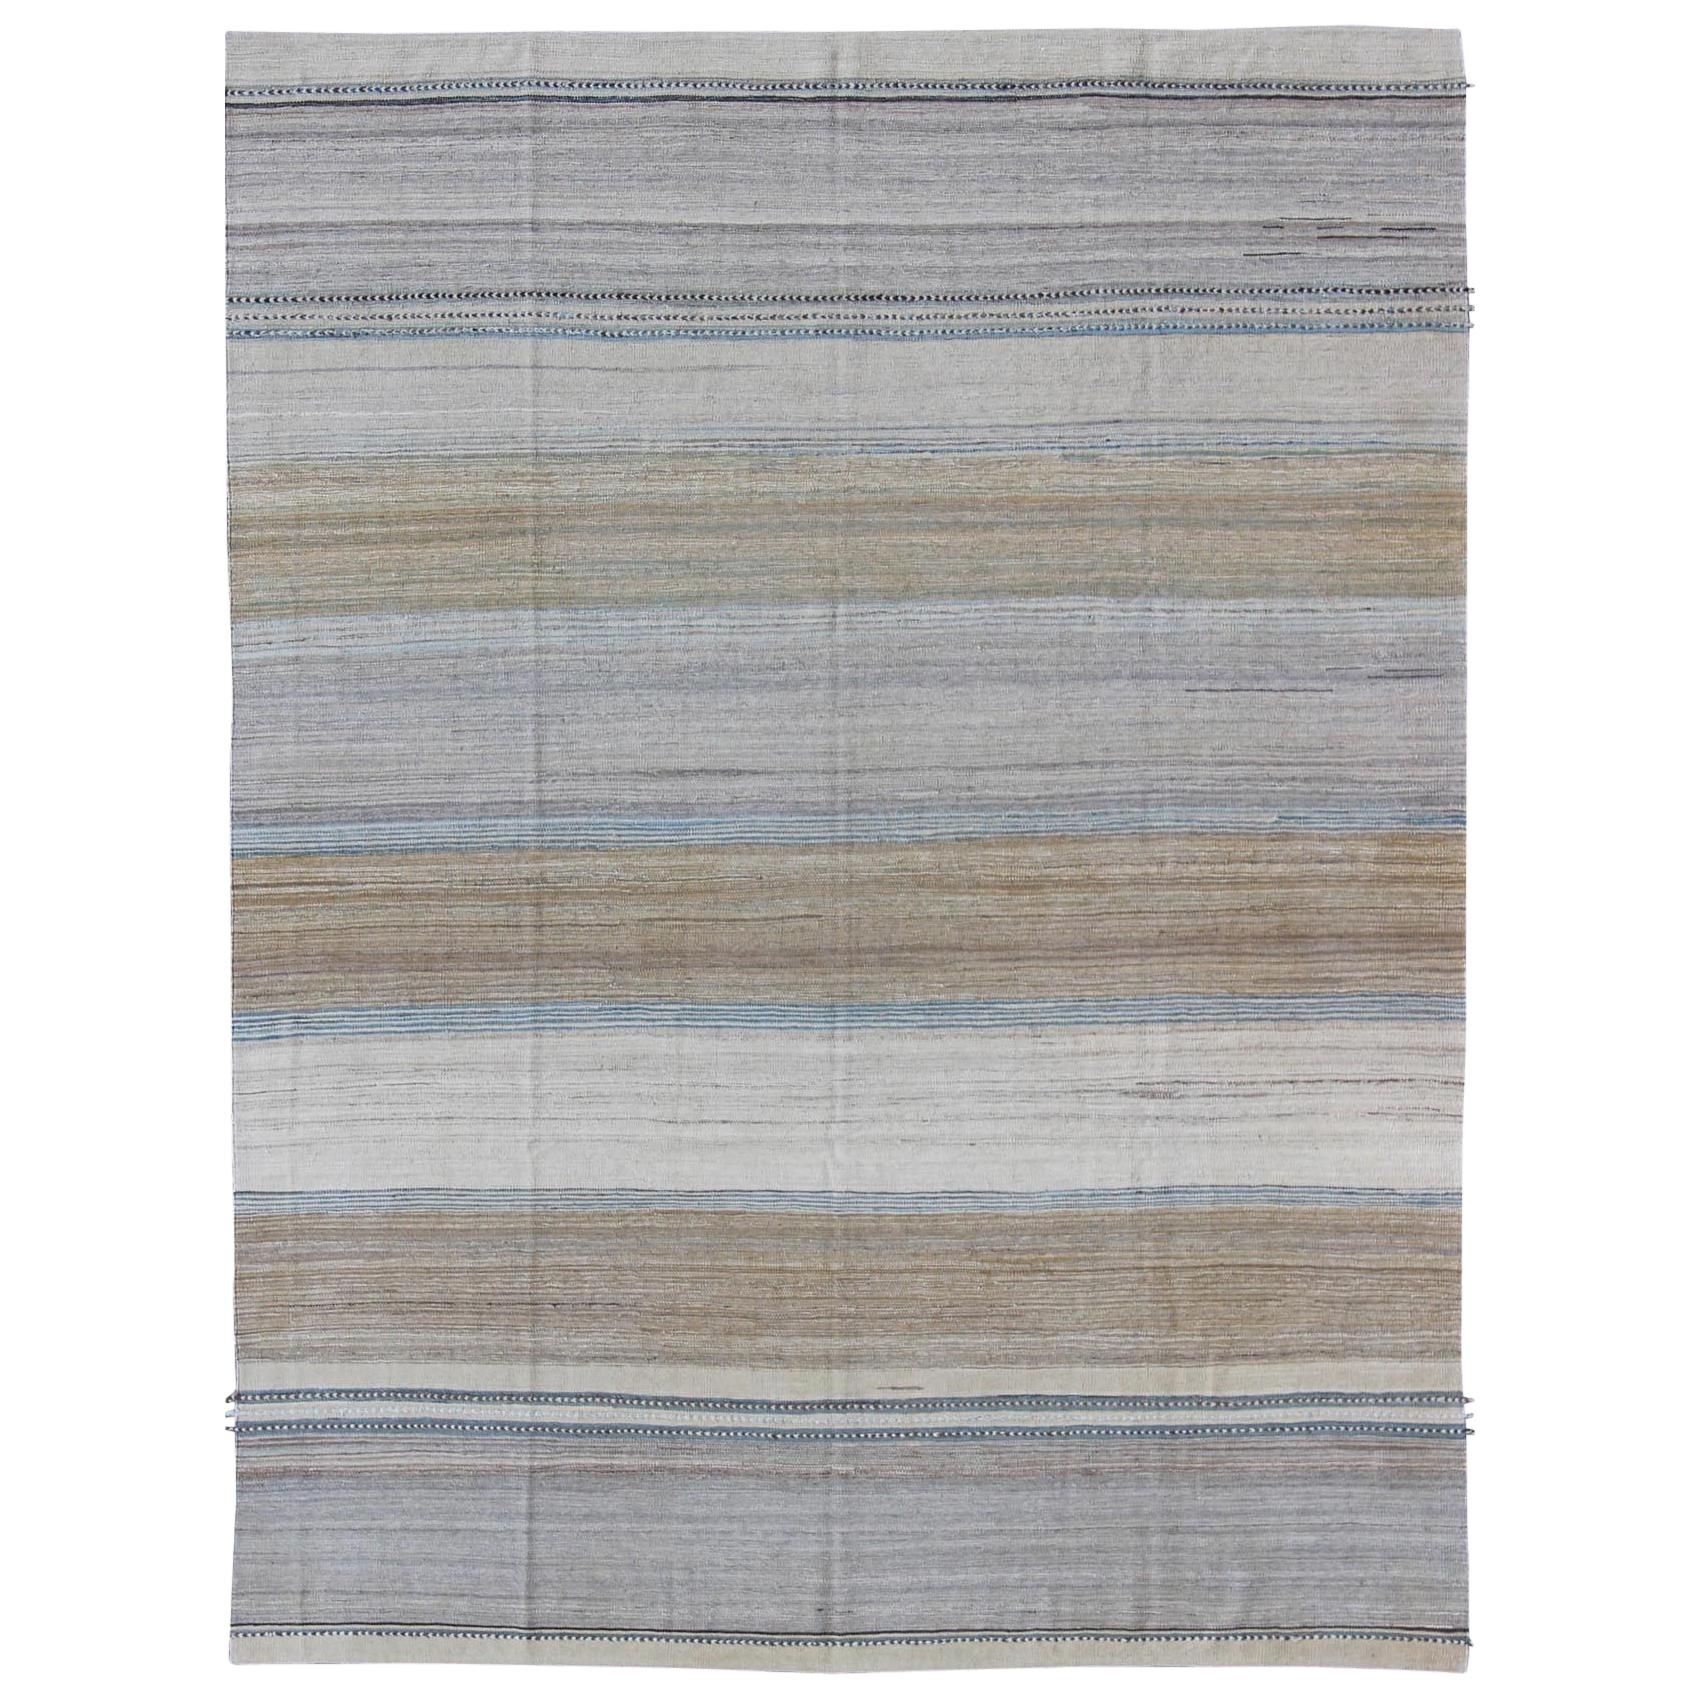 Modern Kilim Rug With Large Stripes in Shades of Blue, Taupe, Light Brown, Gray 